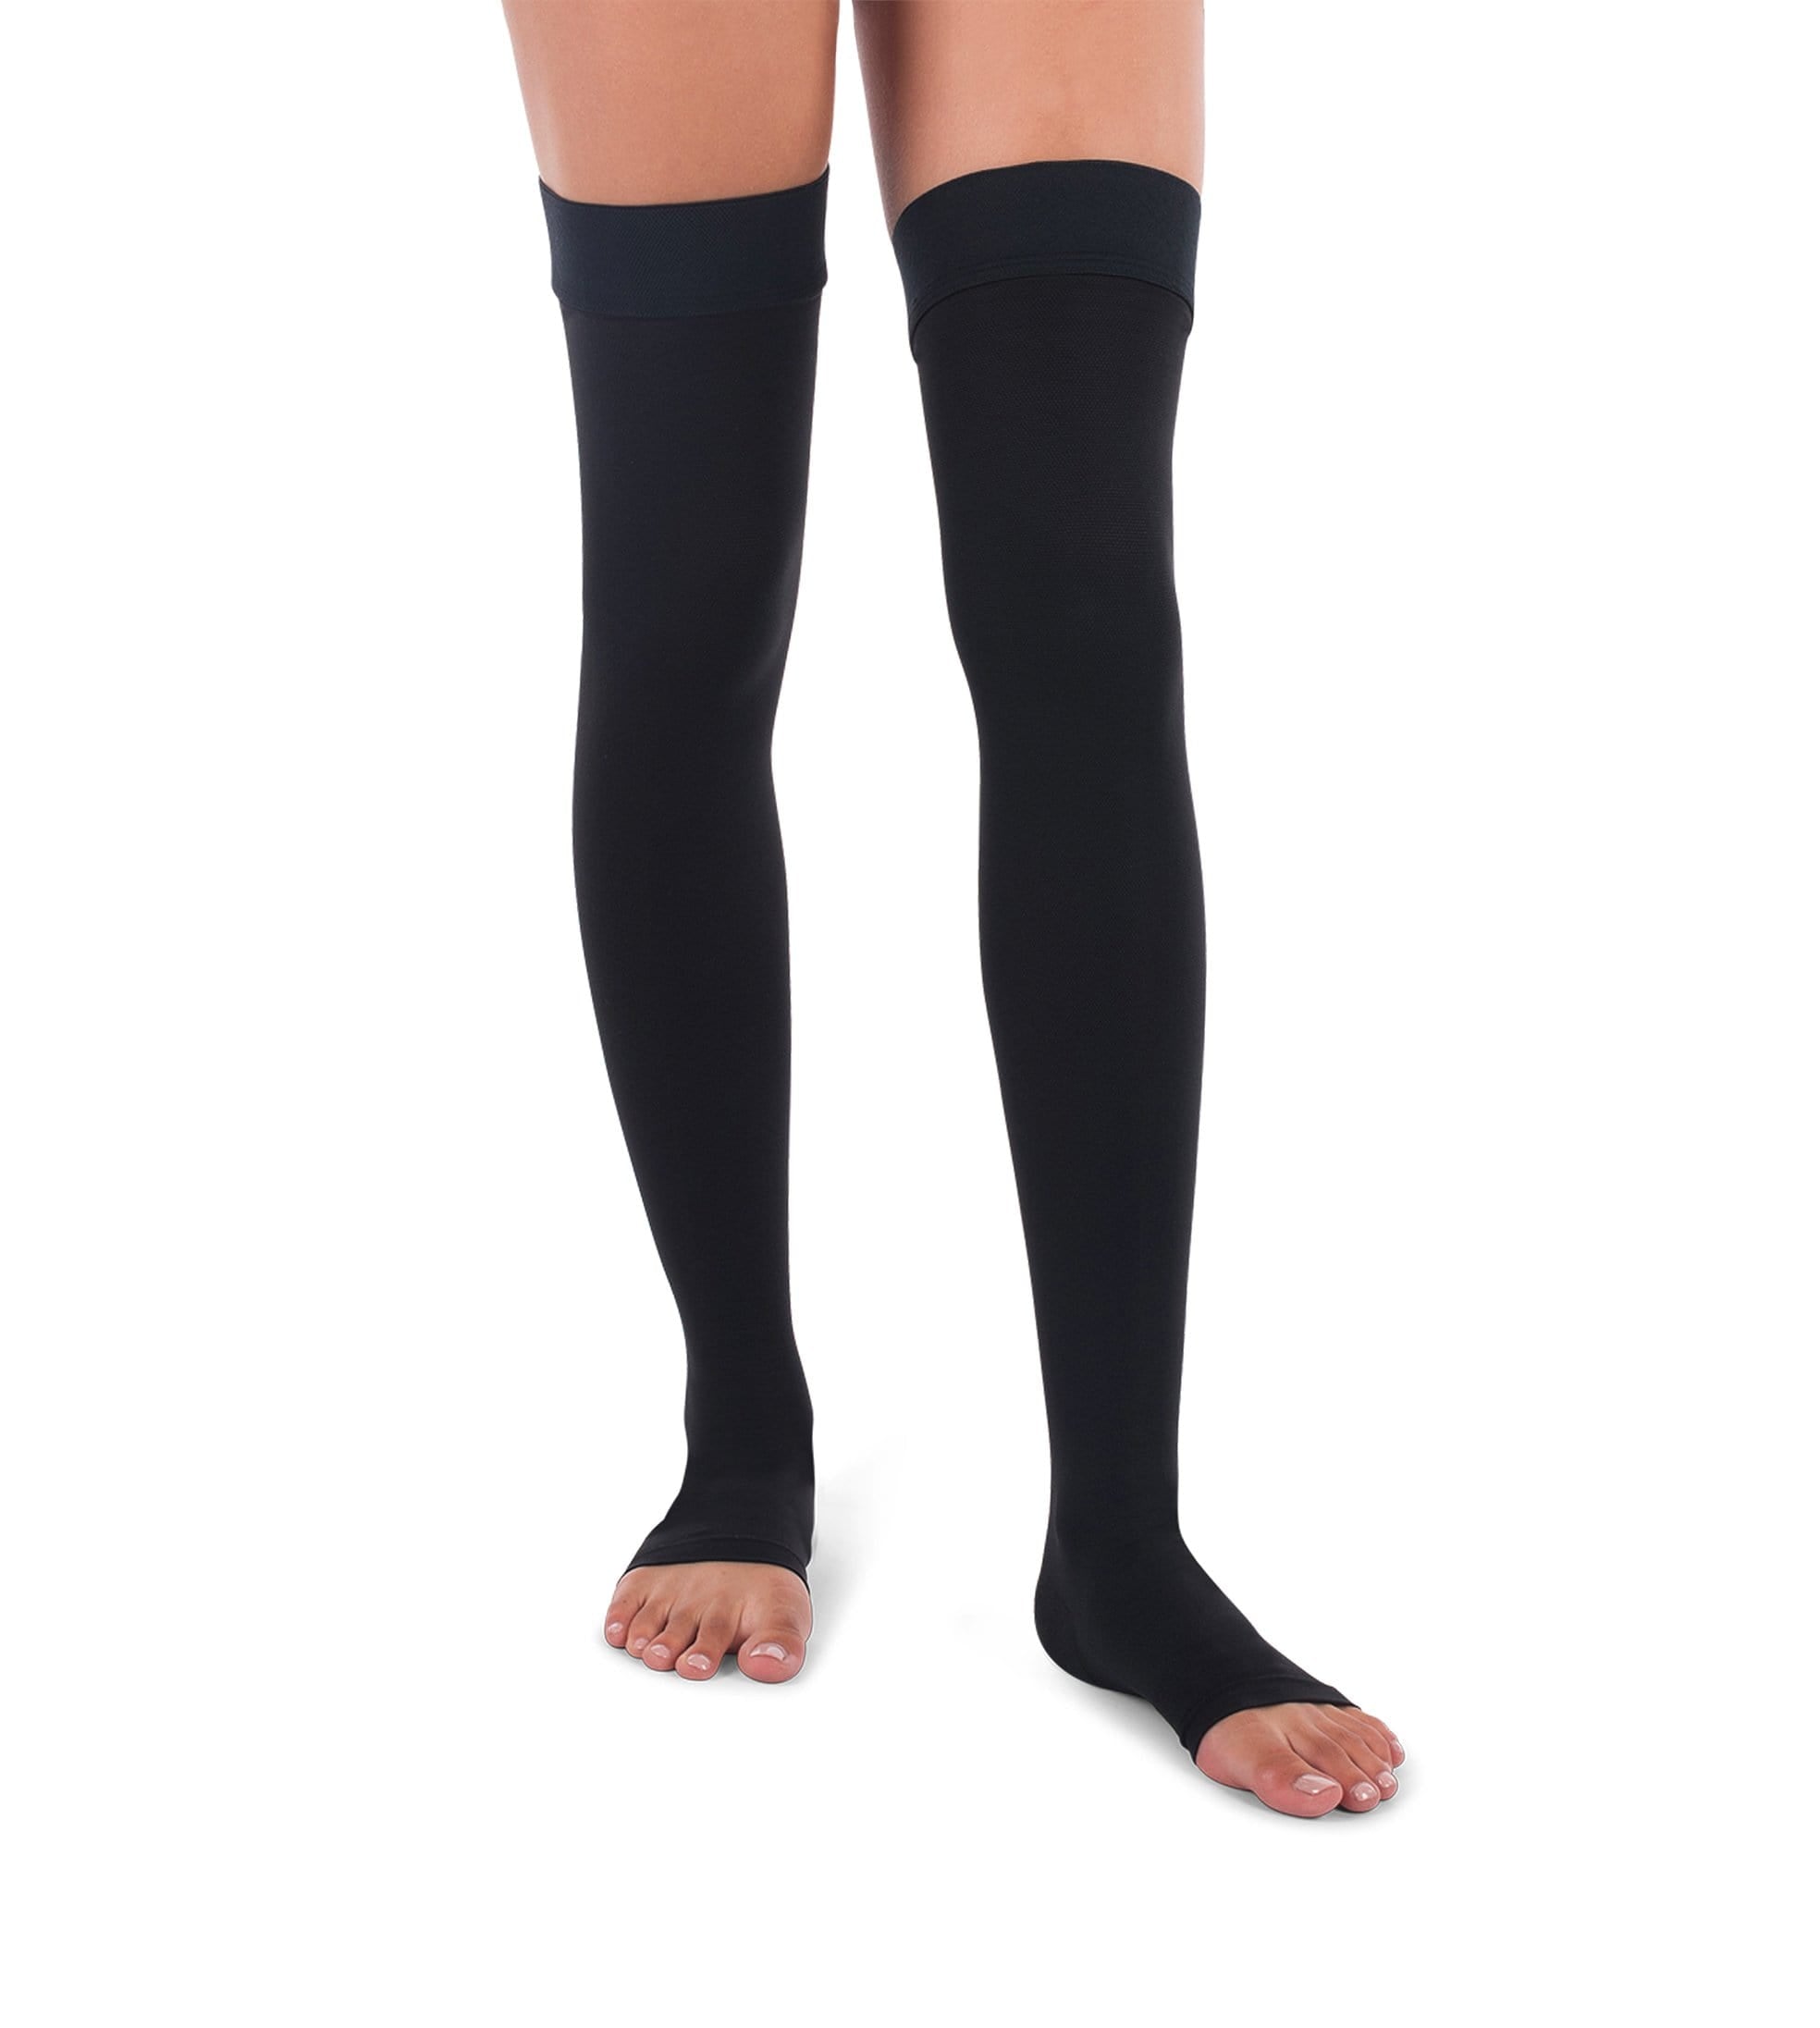 Large Plus Size Compression Socks & Stockings - Discount Surgical